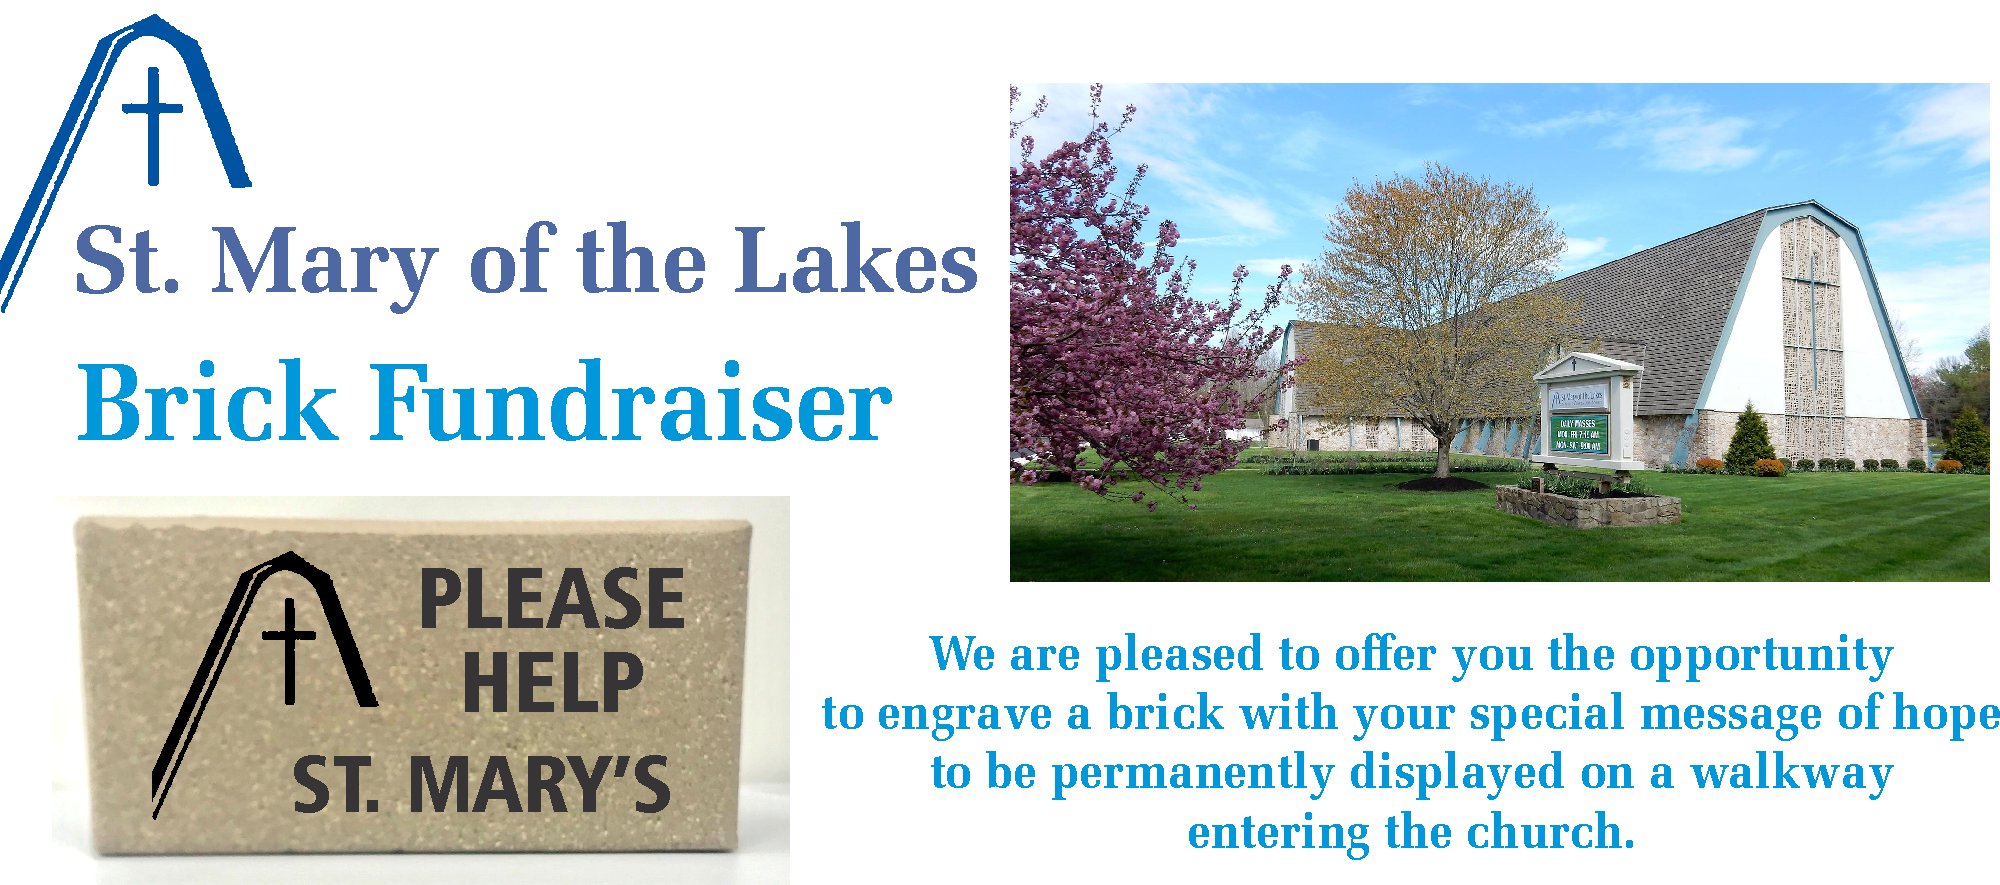 St. Mary of the Lakes Brick Fundraiser